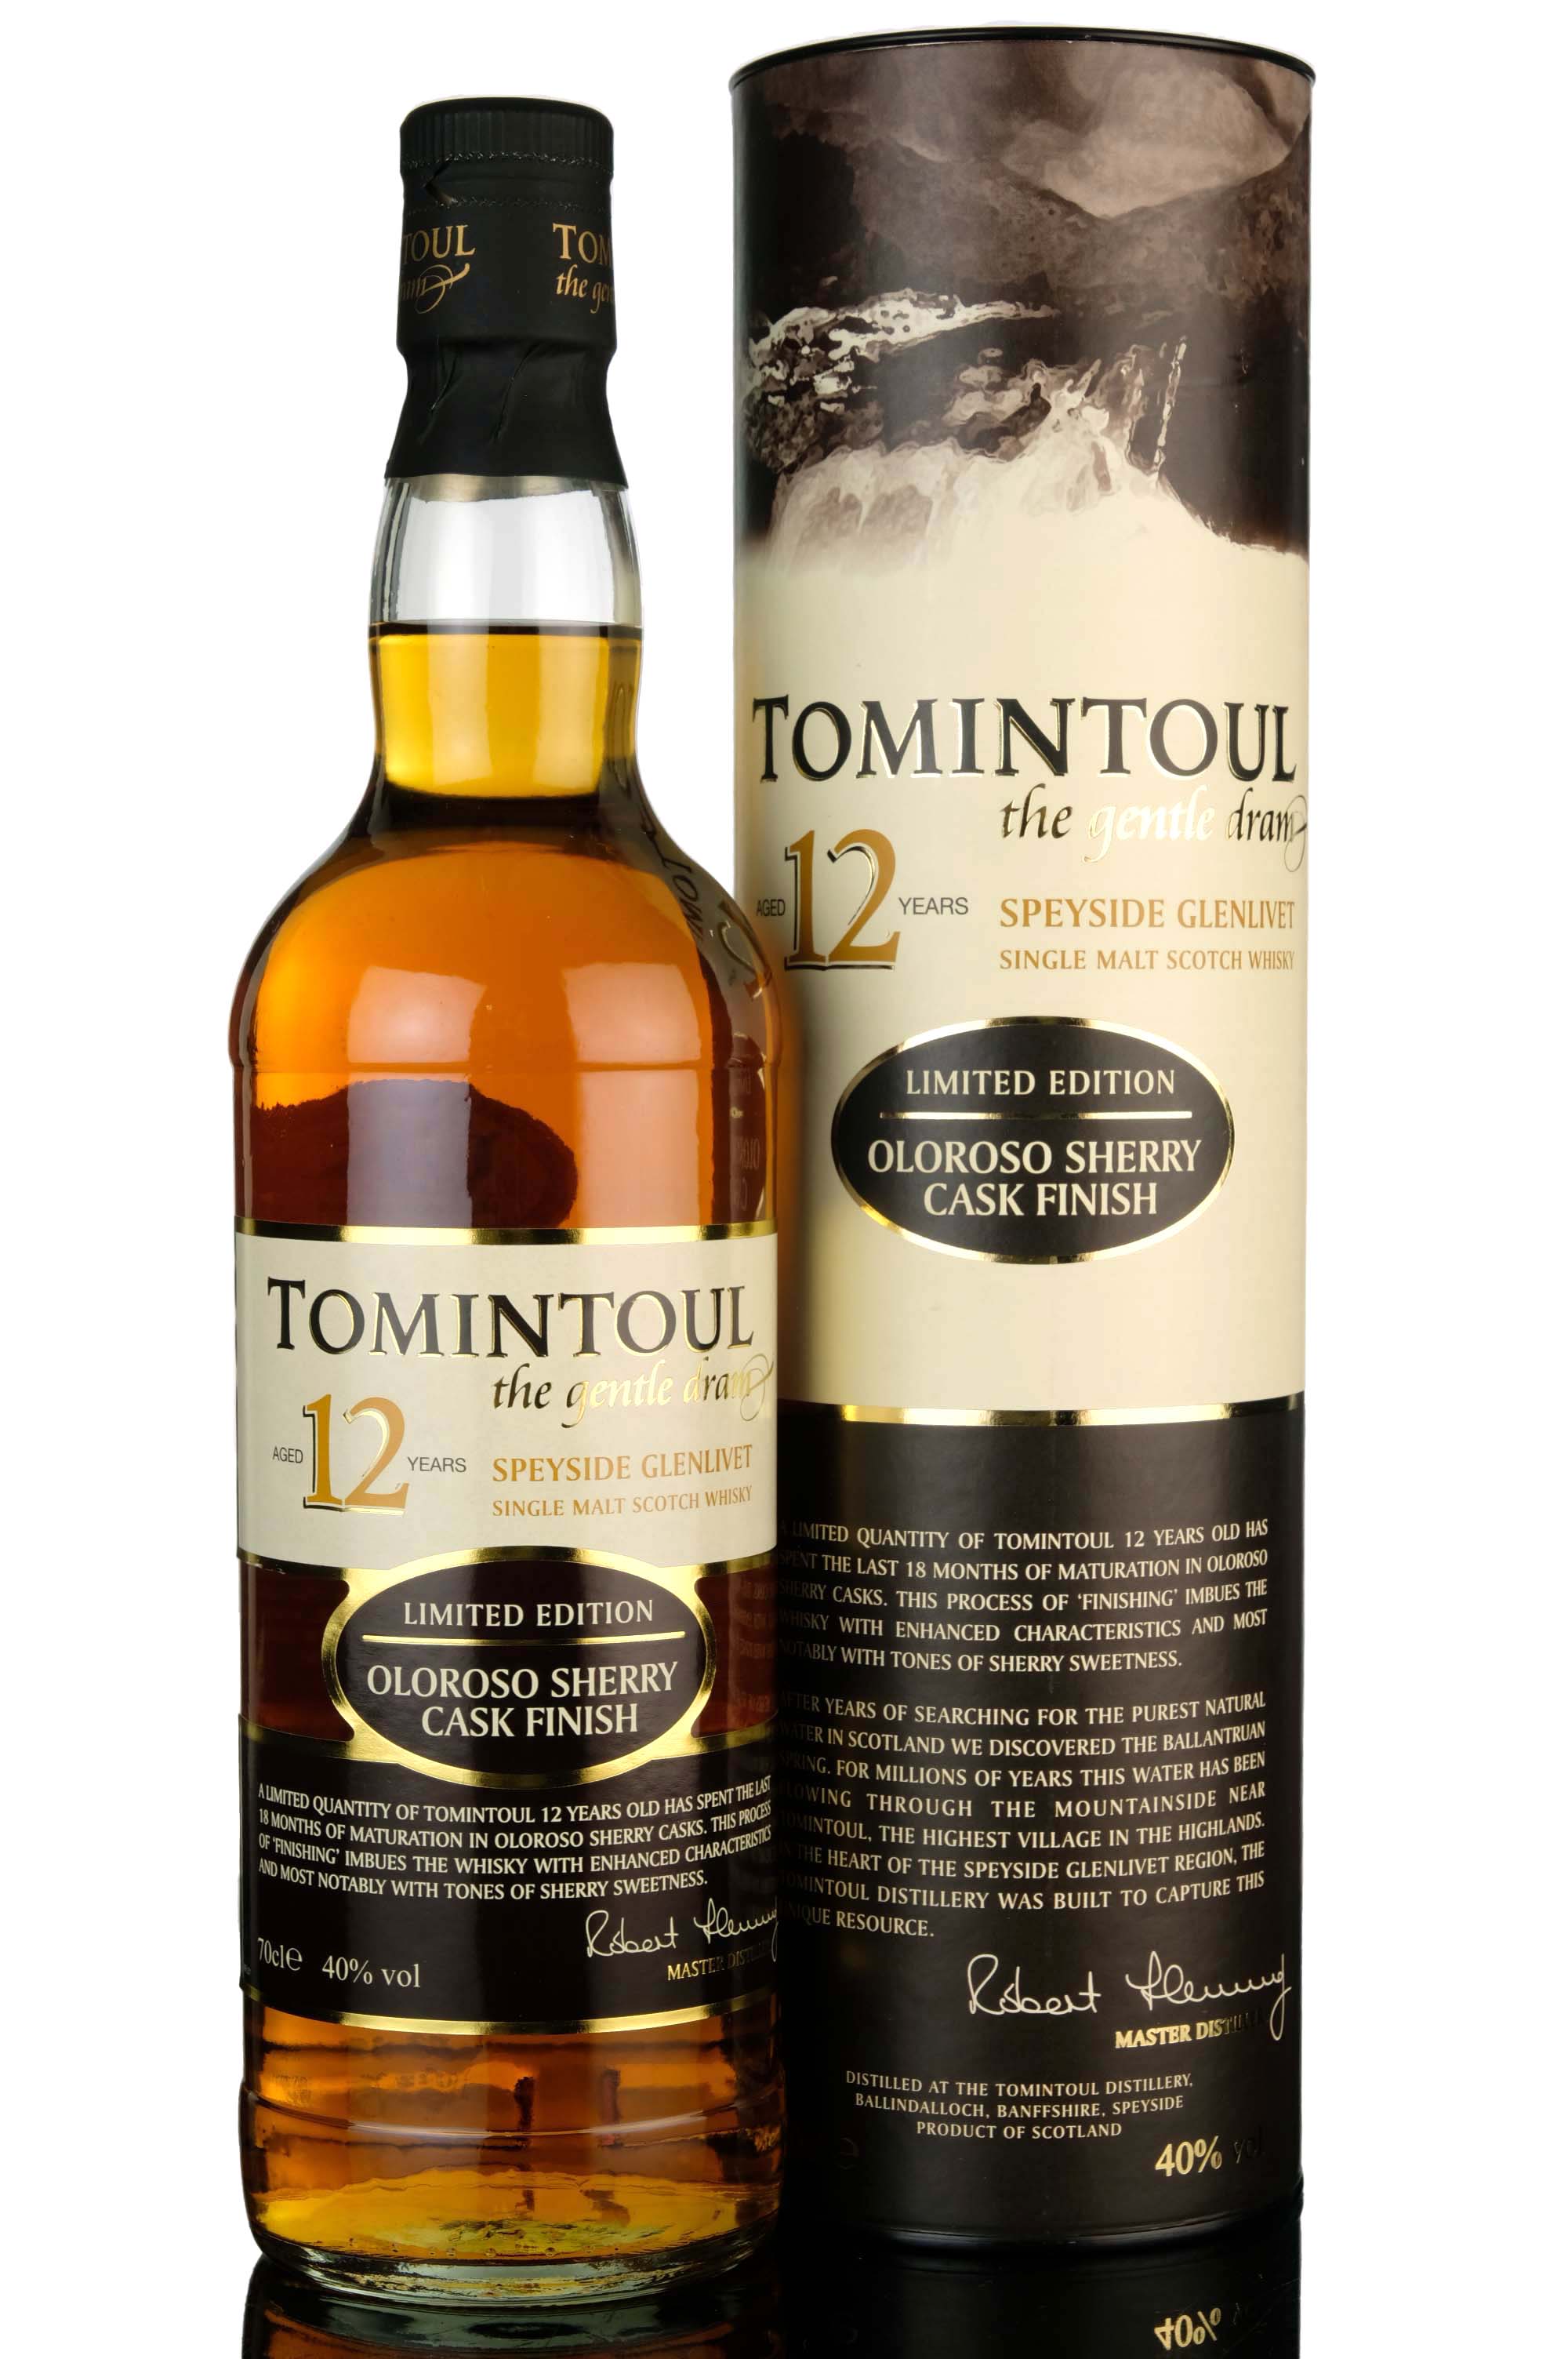 Tomintoul 12 Year Old - Oloroso Sherry Cask Finish - 2000s